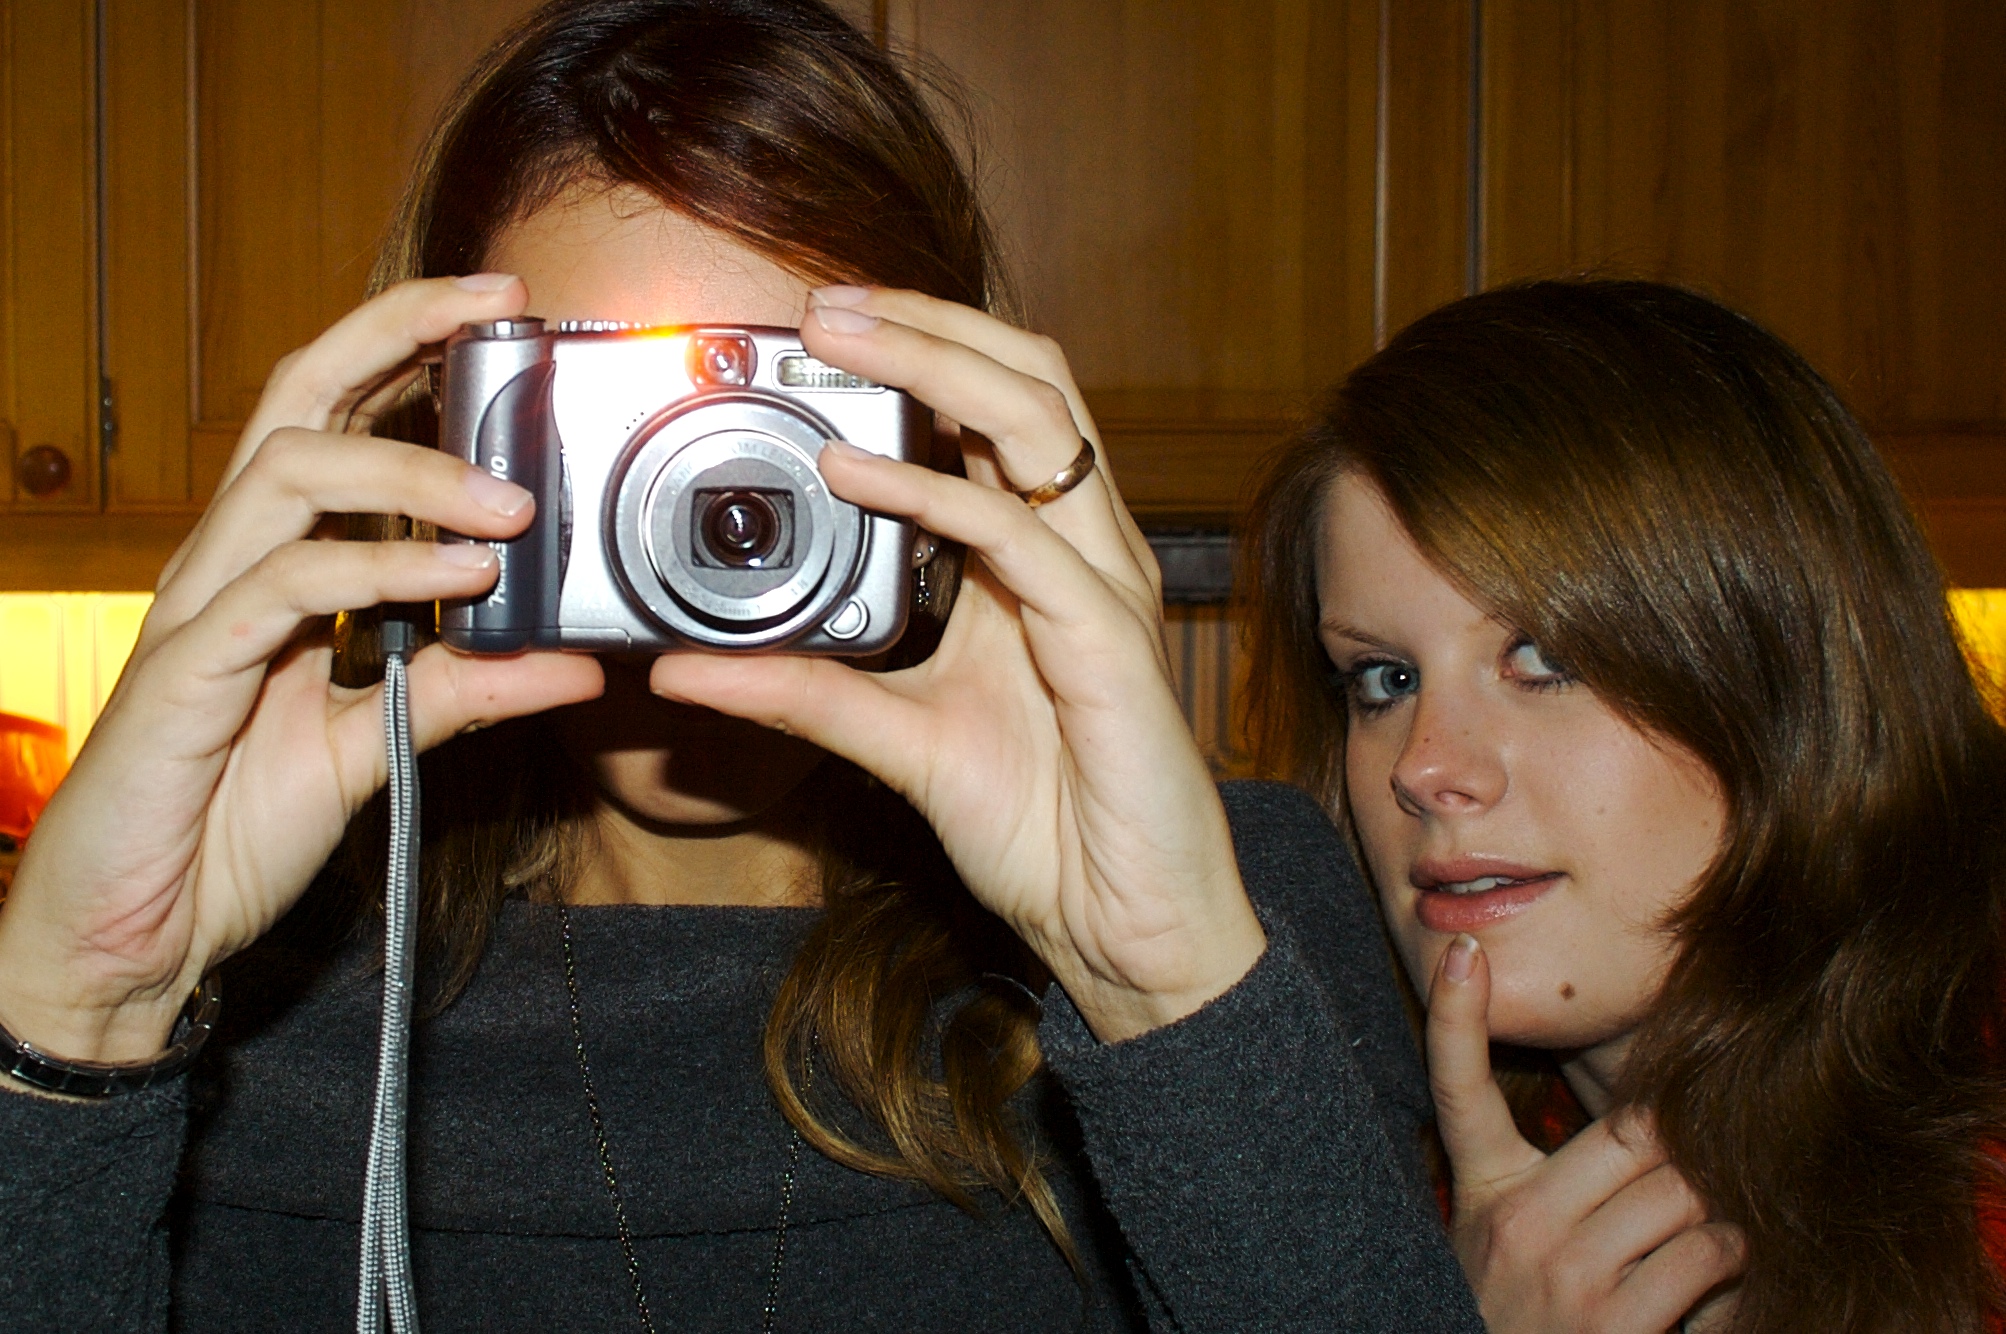 two women taking pictures with their camera in the kitchen